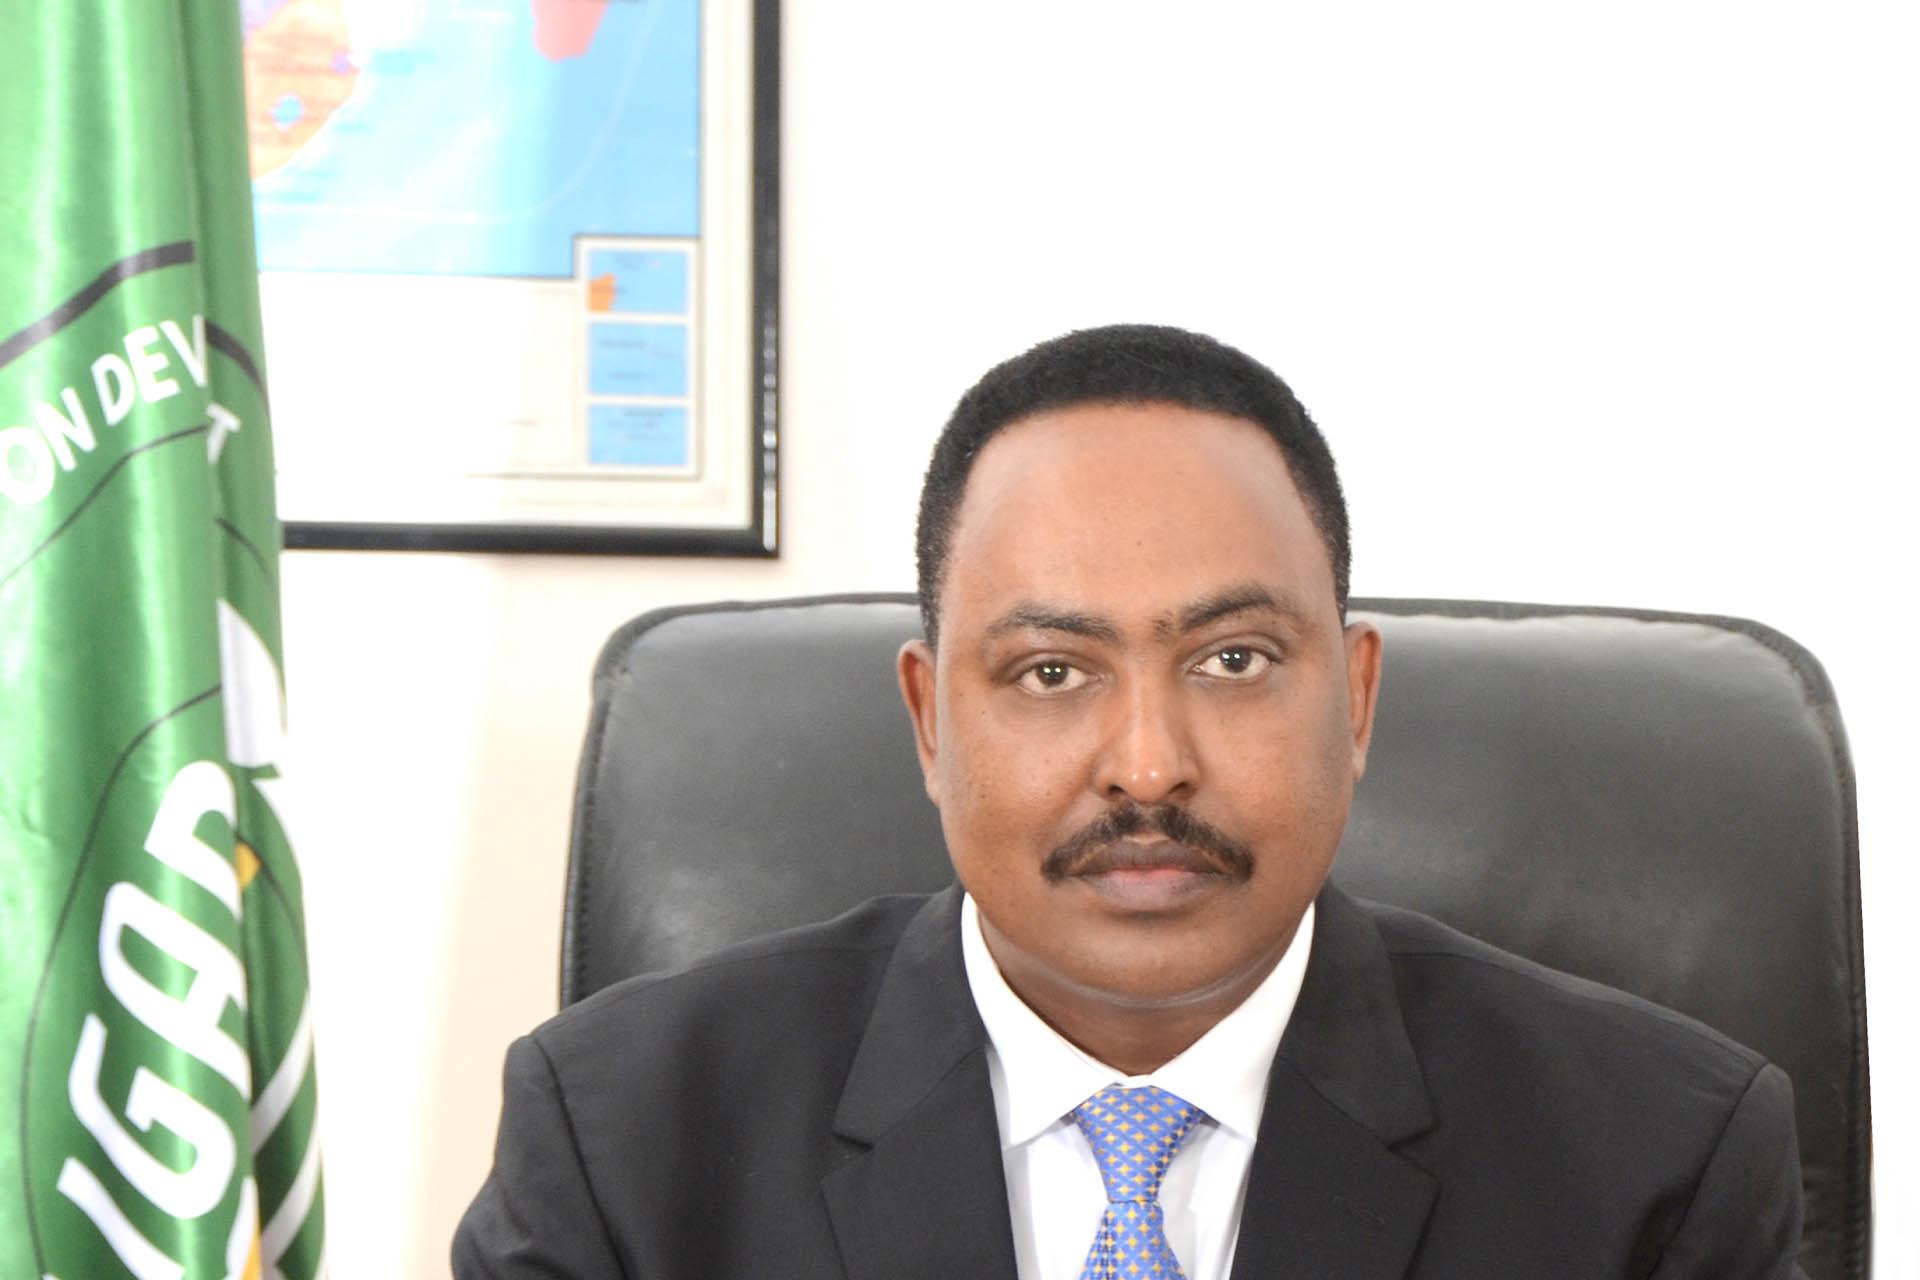 Official Remarks by Dr. Workneh Gebeyehu, IGAD Executive Secretary at the Handover Ceremony to the Ministry of Health, Republic of Sudan of 3 Ambulances from the EU-IGAD COVID-19 Response Project  Tuesday, 1st February 2022